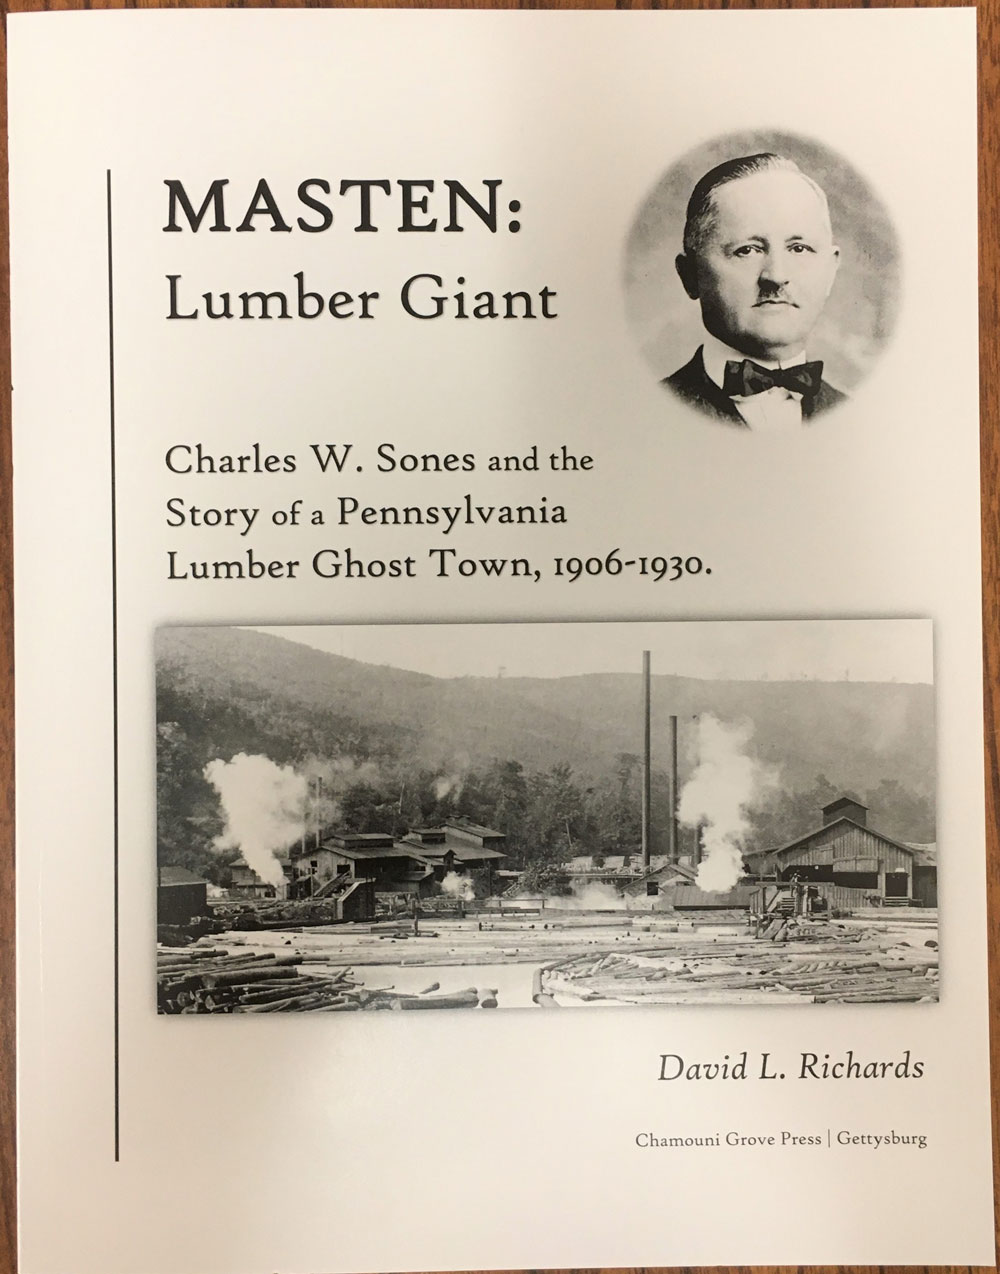 Masten: Lumber Giant, Charles W. Sones and the Story of a Pennsylvania Lumber Ghost Town, 1906-1930. 